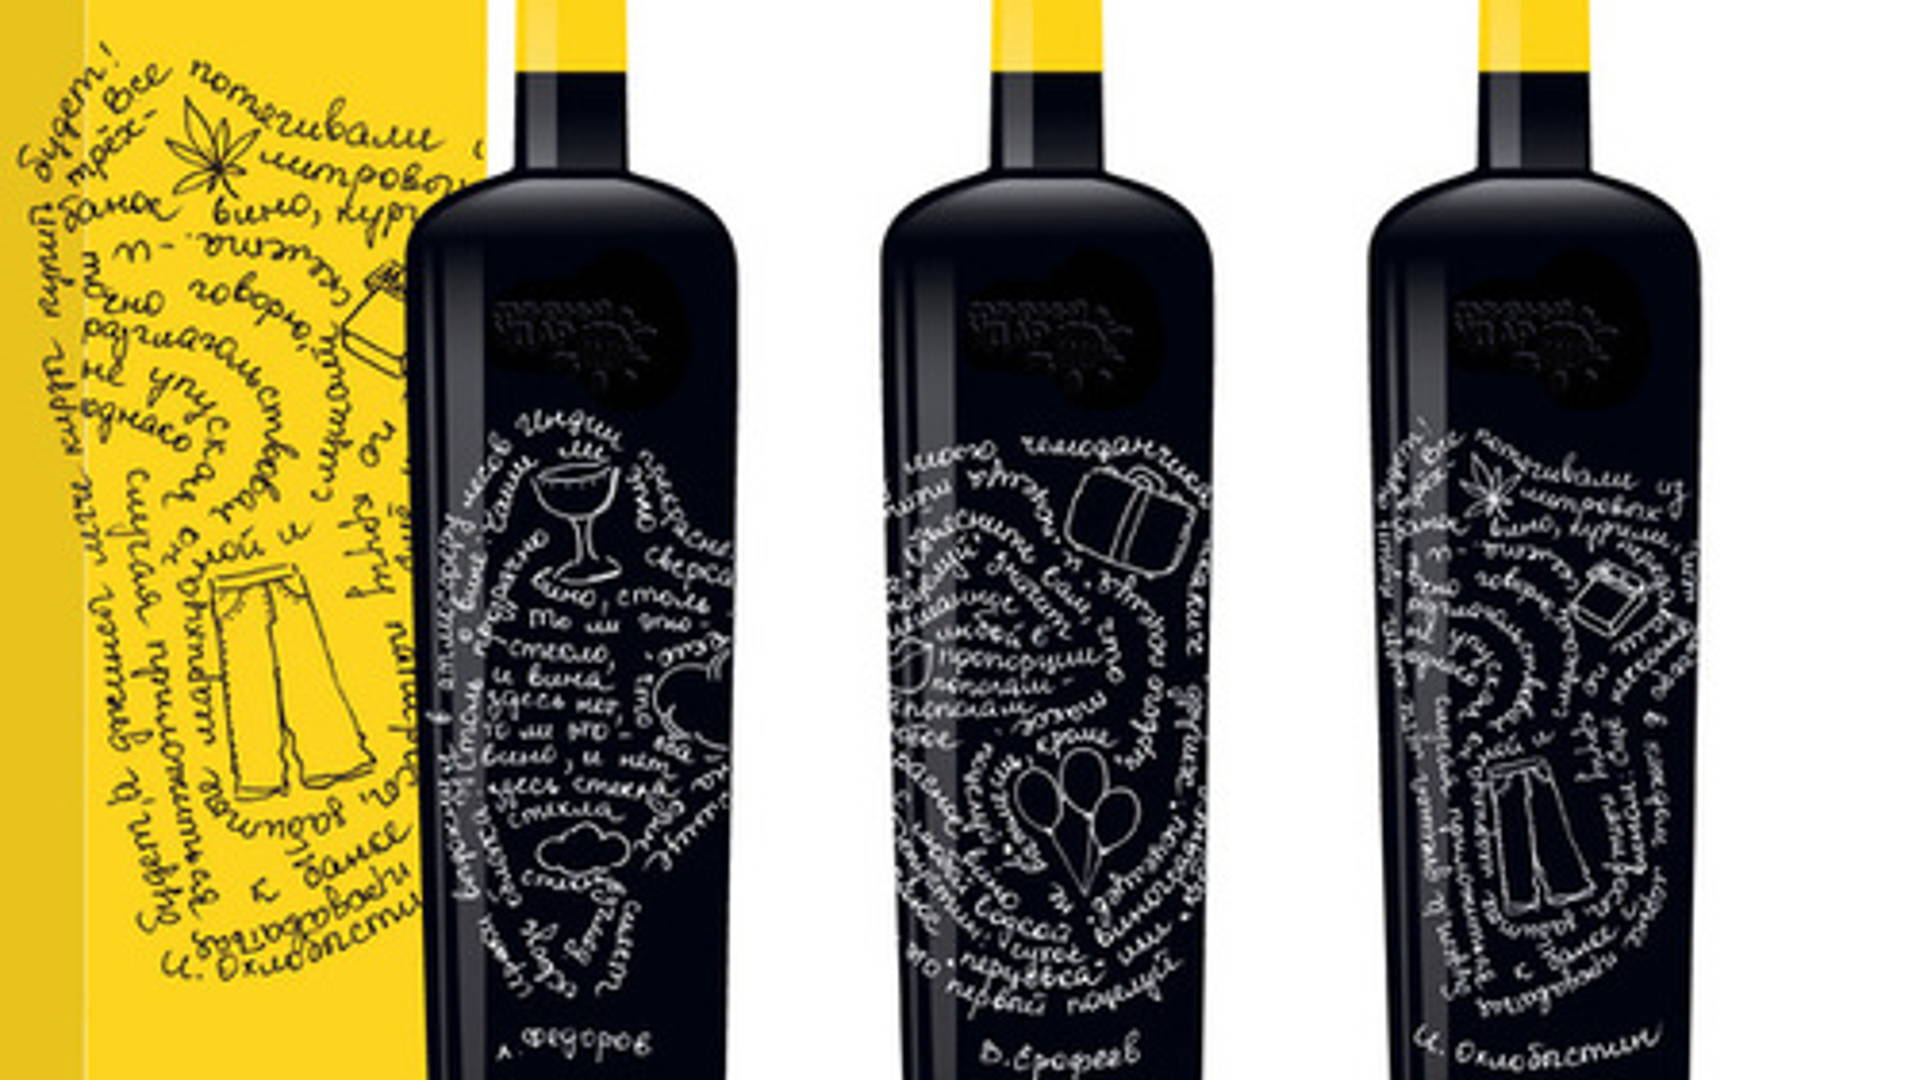 Featured image for Wine Packaging by Nadie Parshina